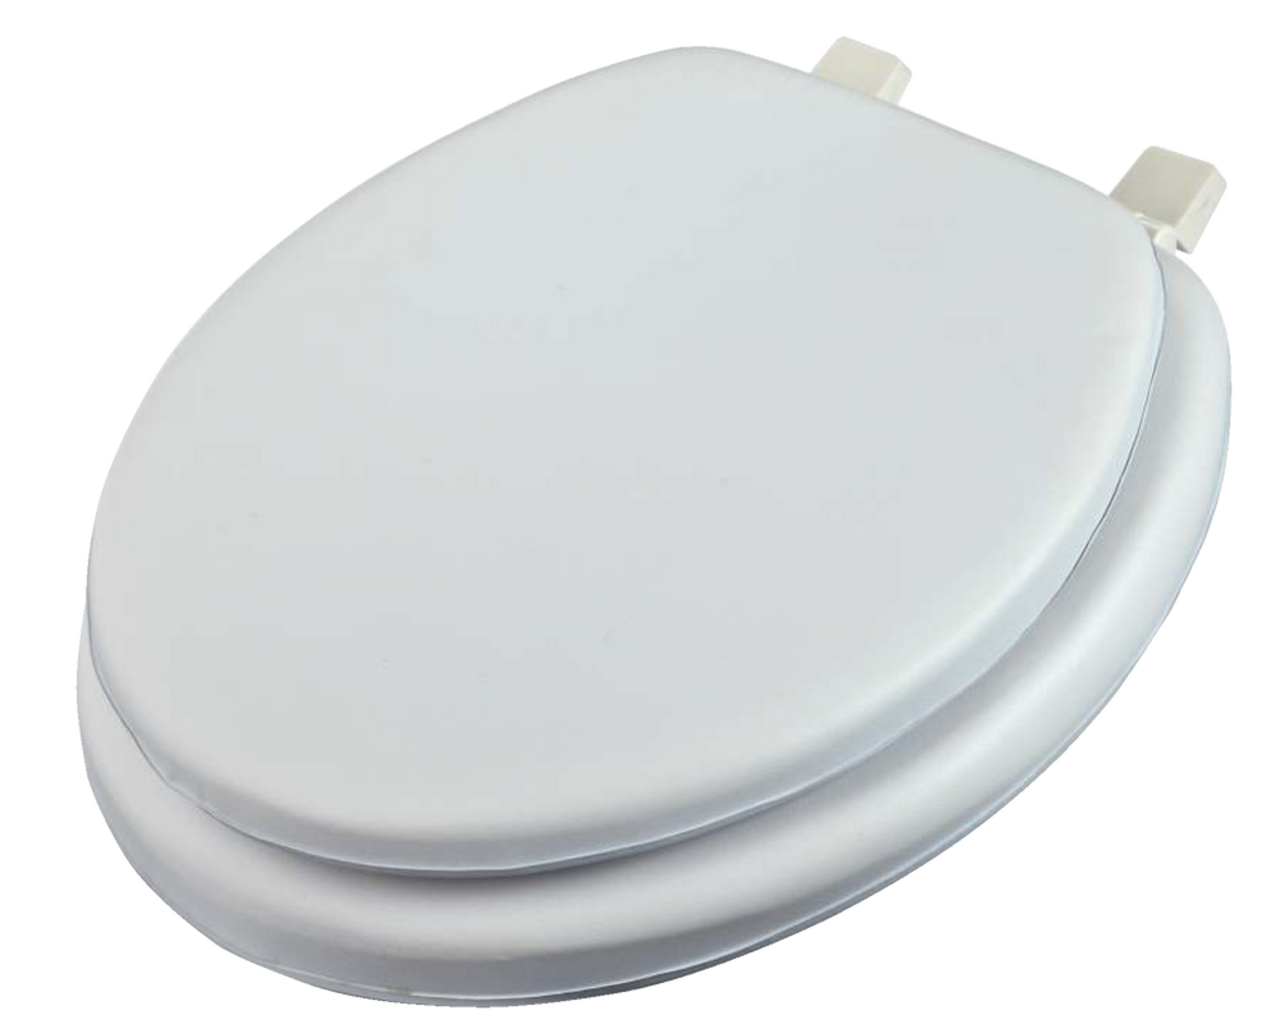 https://media-www.canadiantire.ca/product/fixing/plumbing/faucets-fixtures/0631053/for-living-soft-white-toiletseat-round--4fd5c52b-1871-4c7a-80f4-ae46c35f5262.png?imdensity=1&imwidth=640&impolicy=mZoom